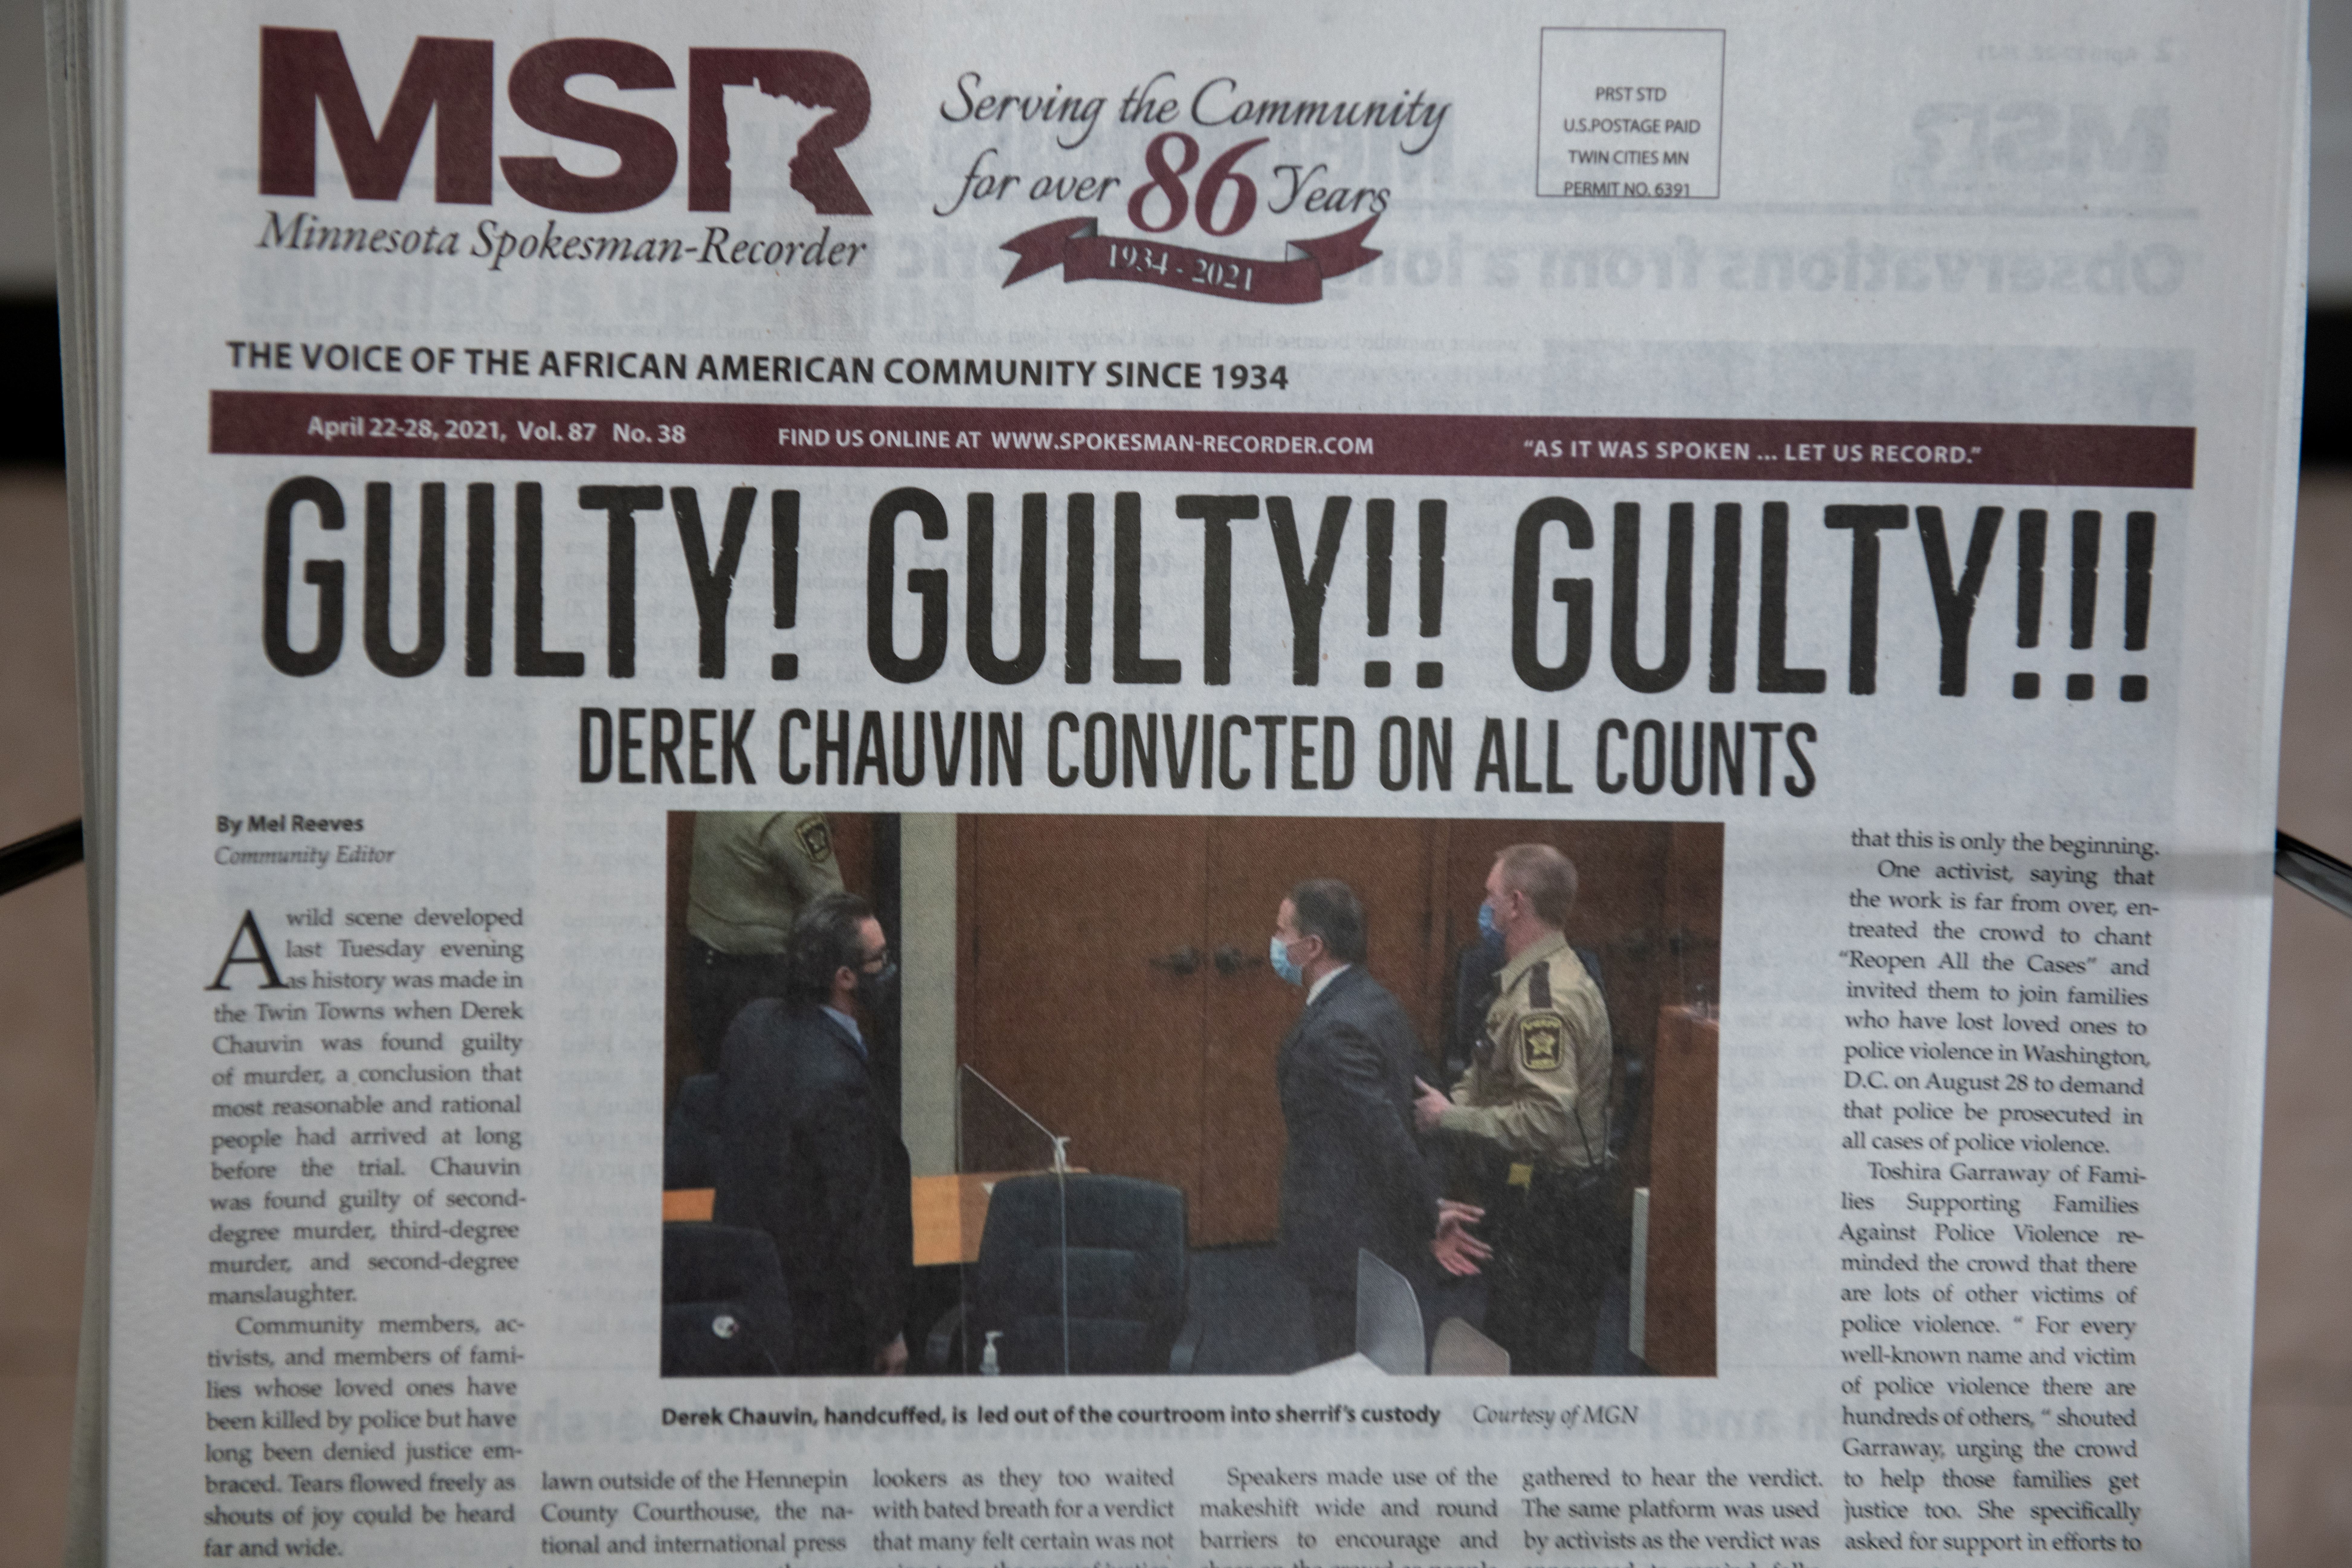 The Minnesota Spokesman-Recorder is pictured the day after Derek Chauvin was found guilty in Minneapolis